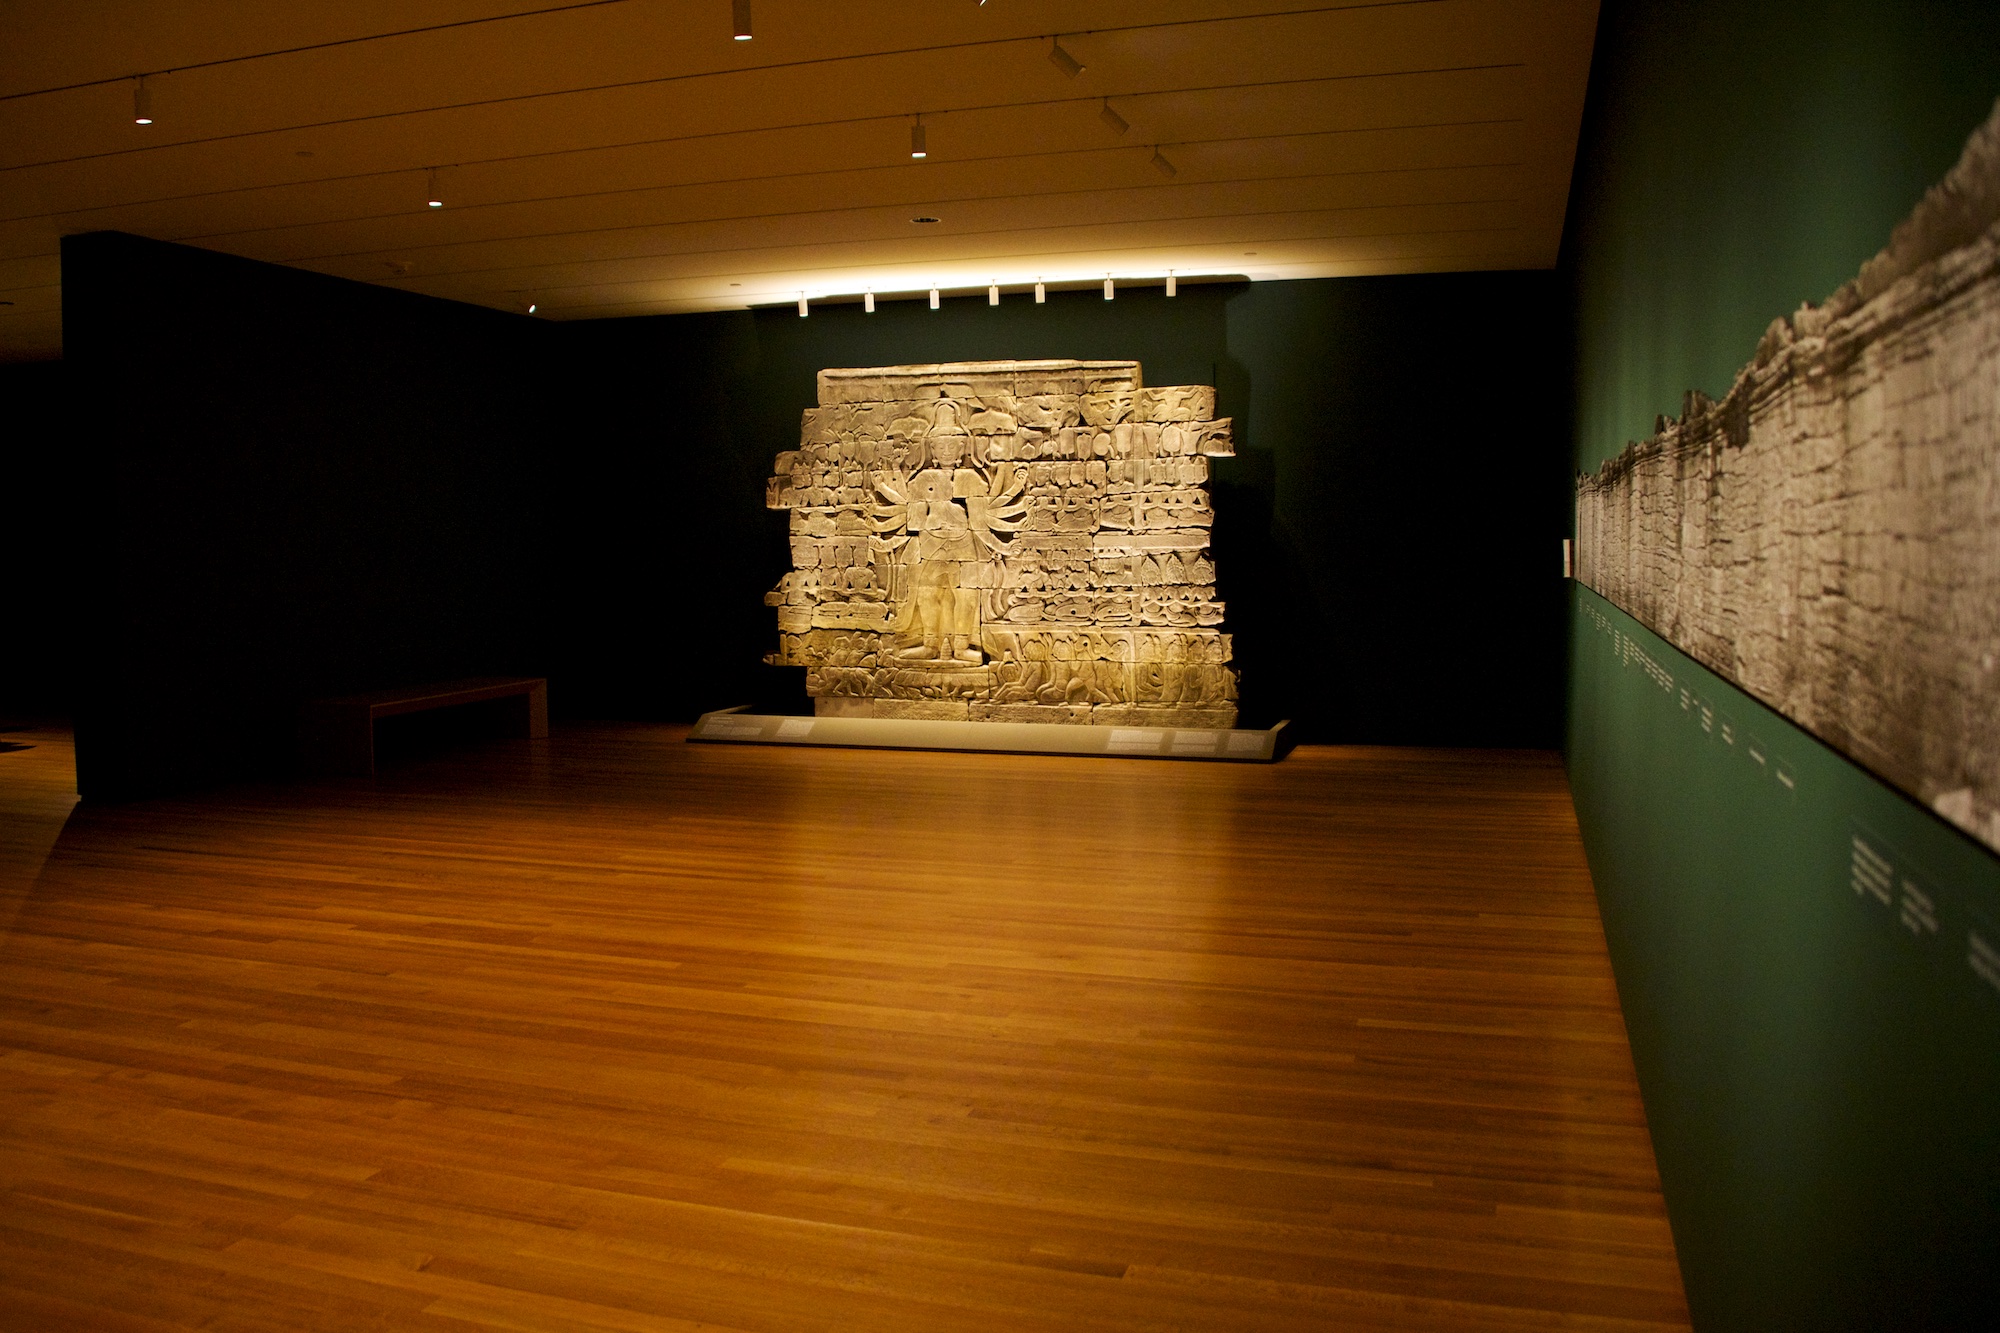 Khmer Culture Comes to Cleveland: One-of-a-Kind Cambodian Loan at Cleveland Museum of Art